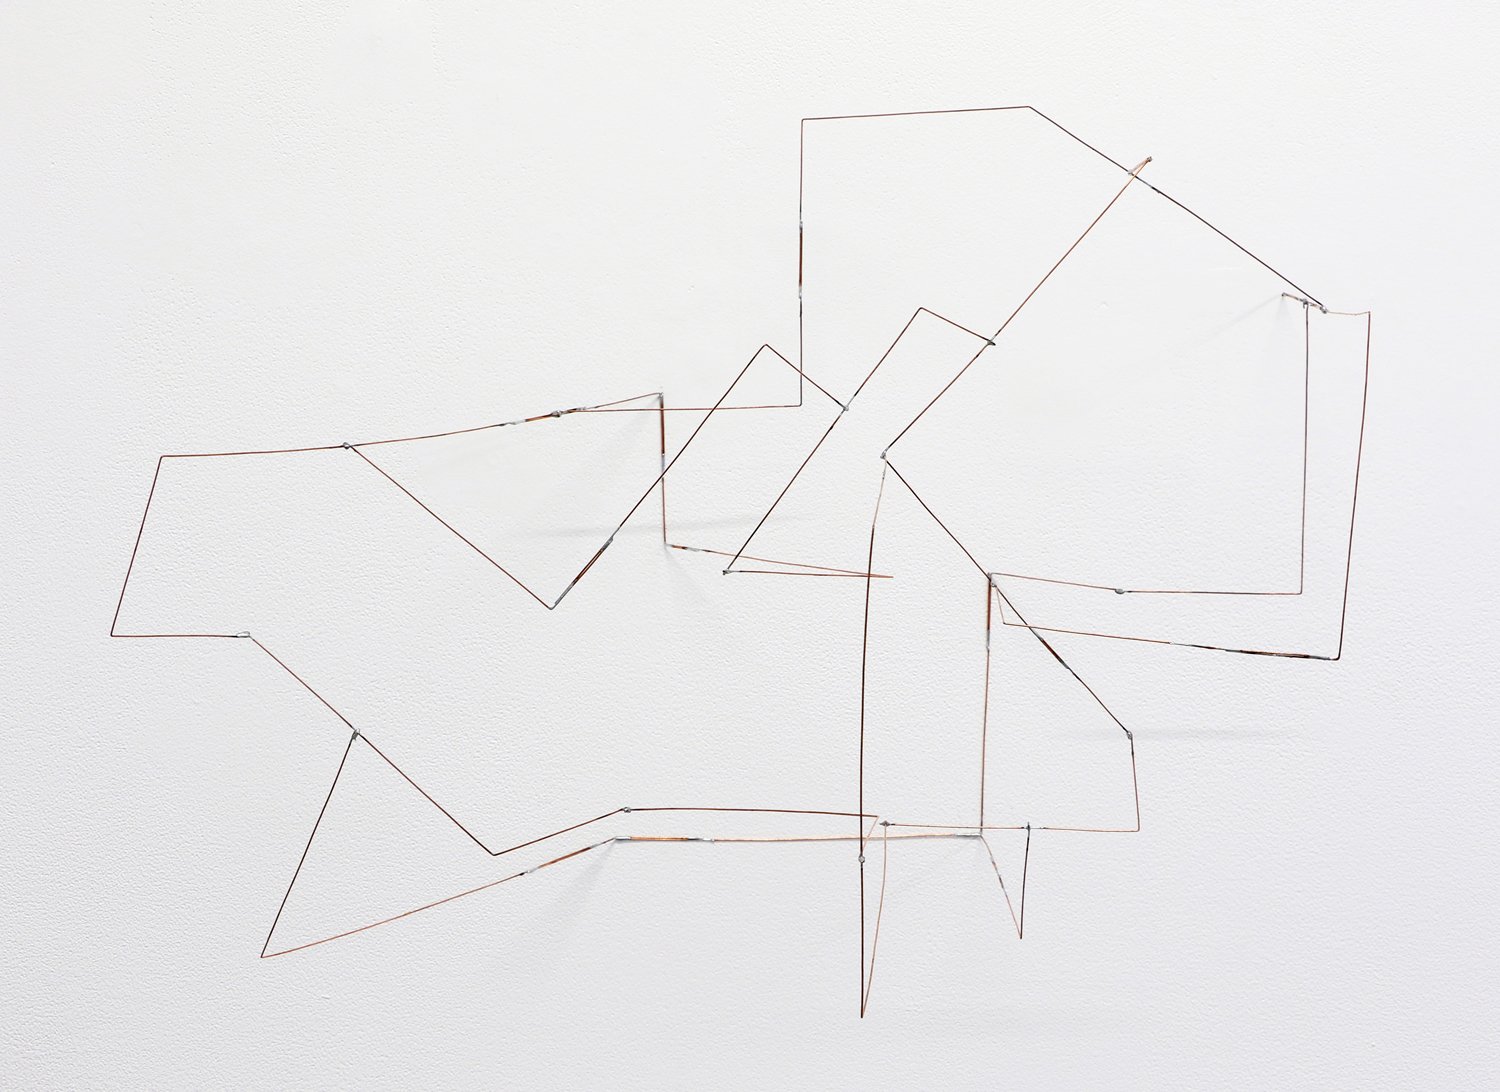   Melling , 2019, soldered copper-coated steel wire, 14 x 22 x 14 in 